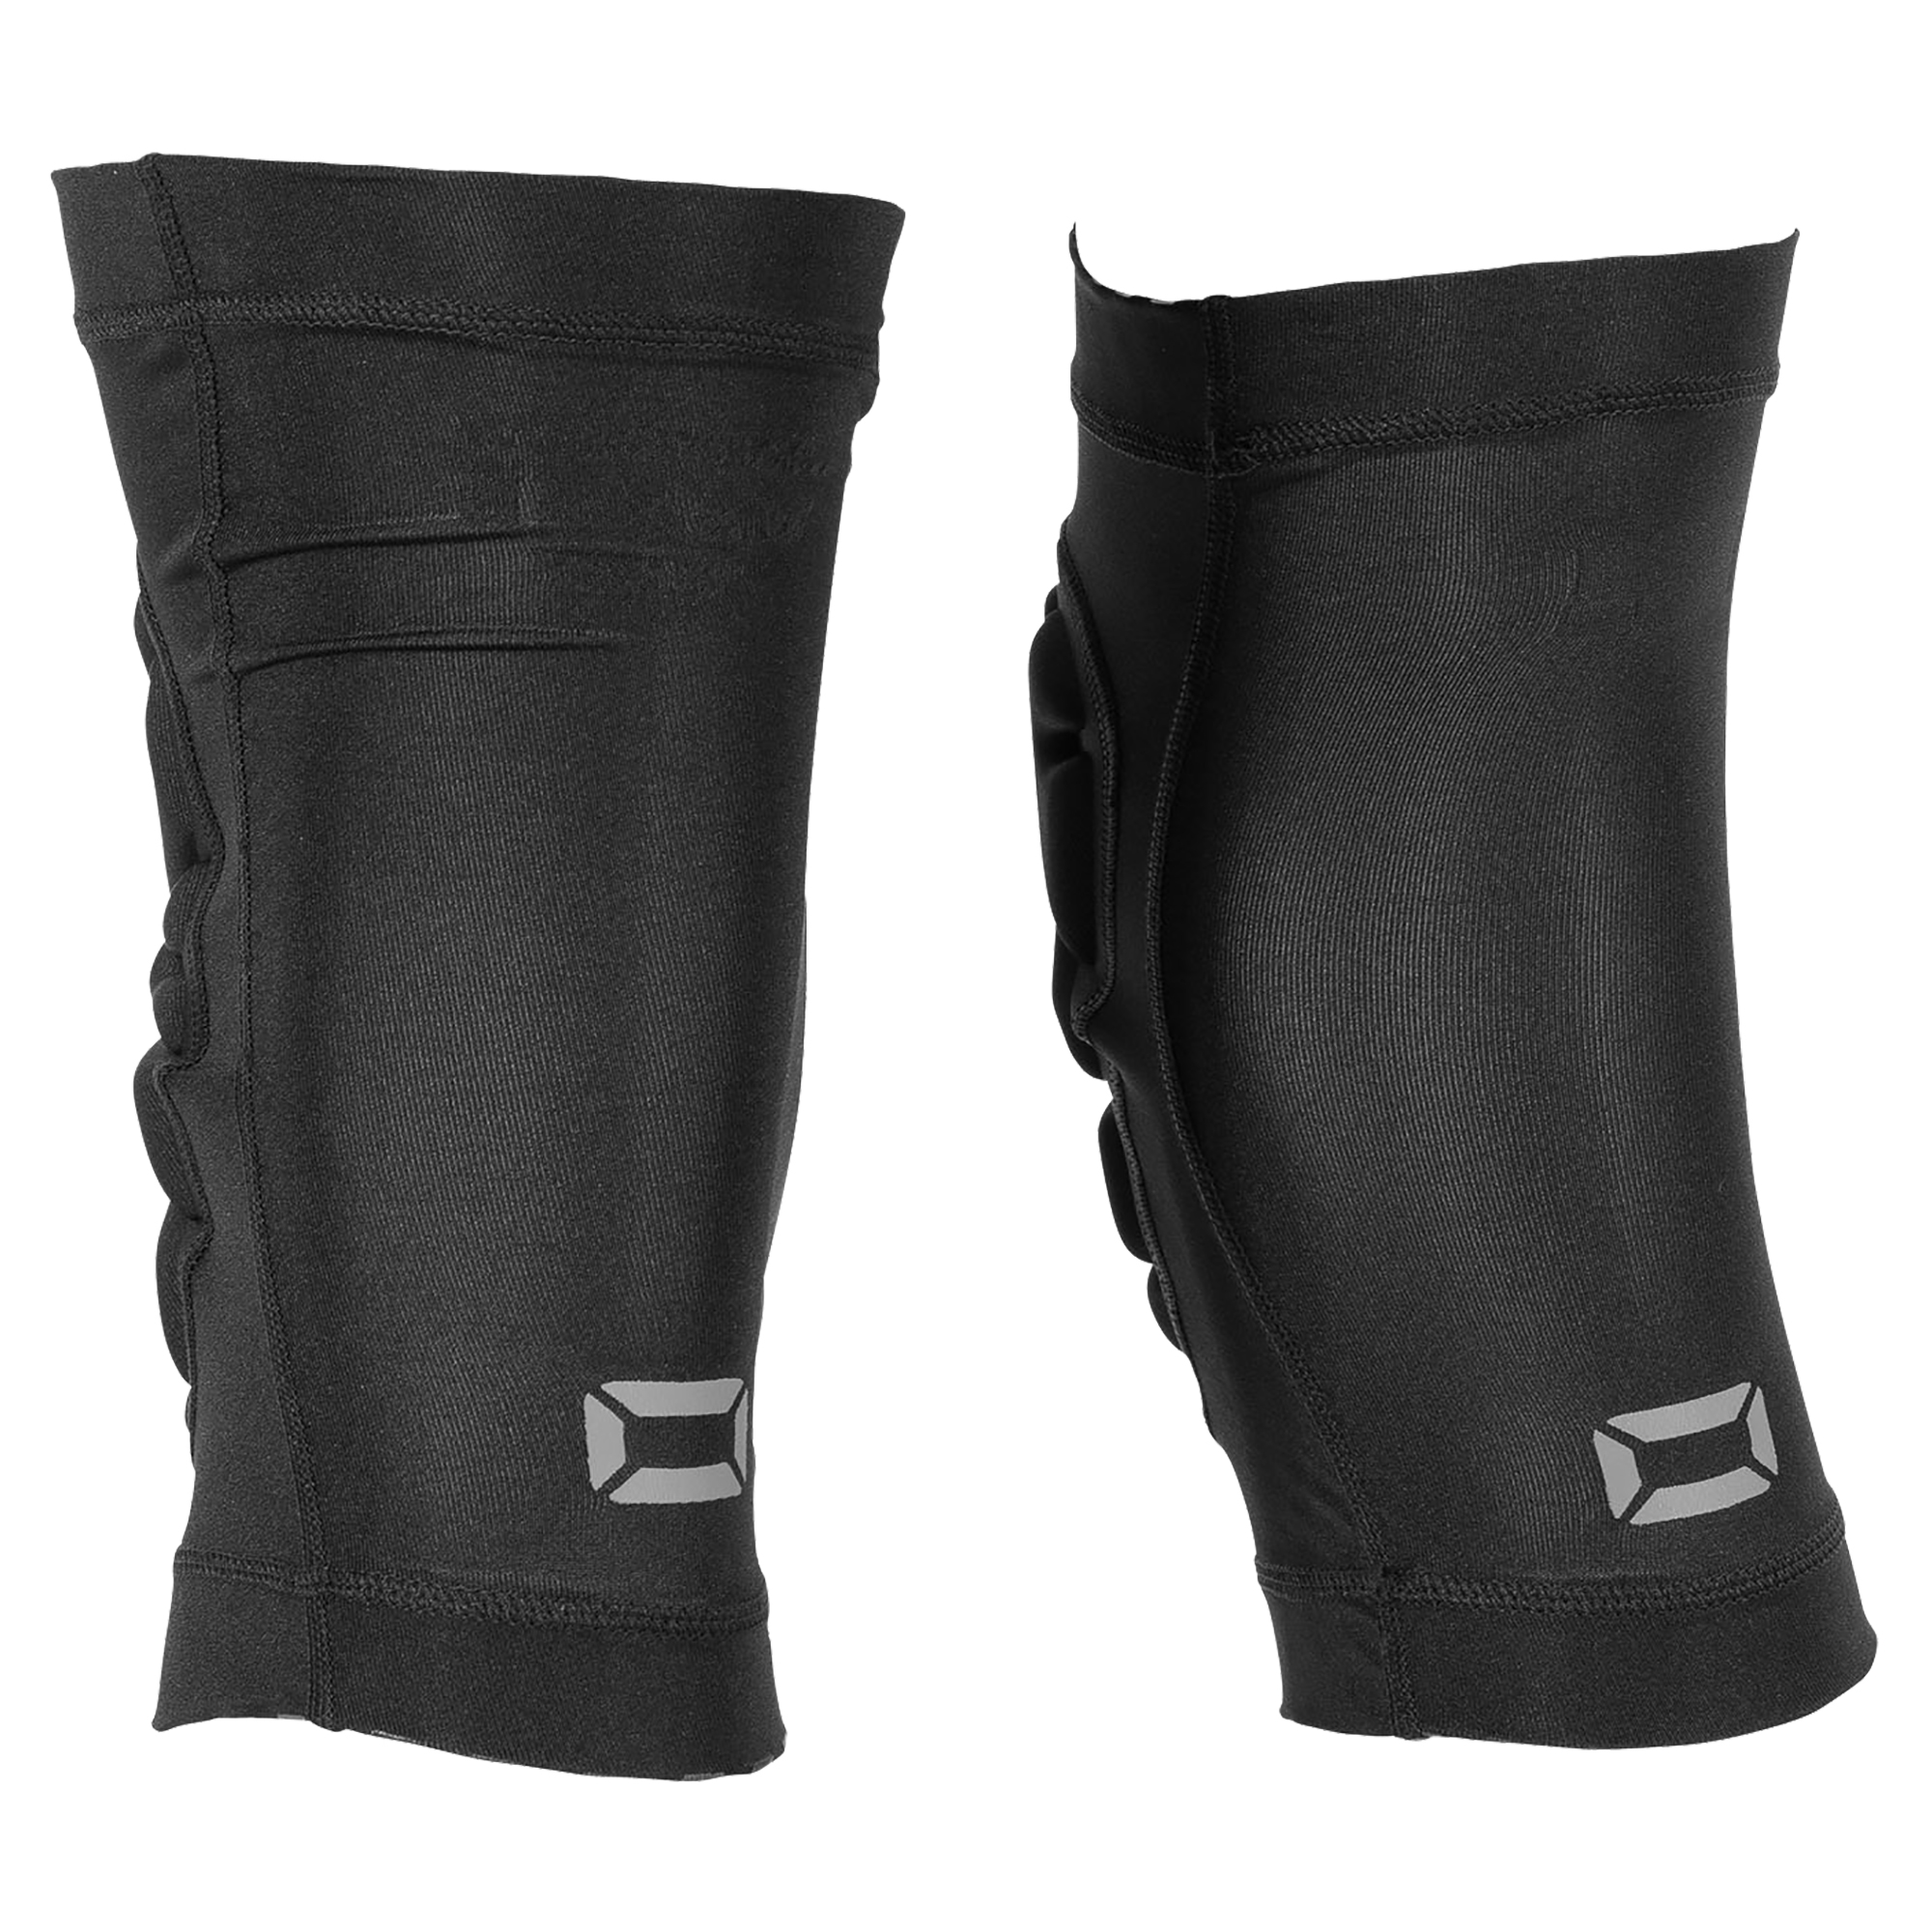 Stanno Equip Protection Pro Knee Sleeve